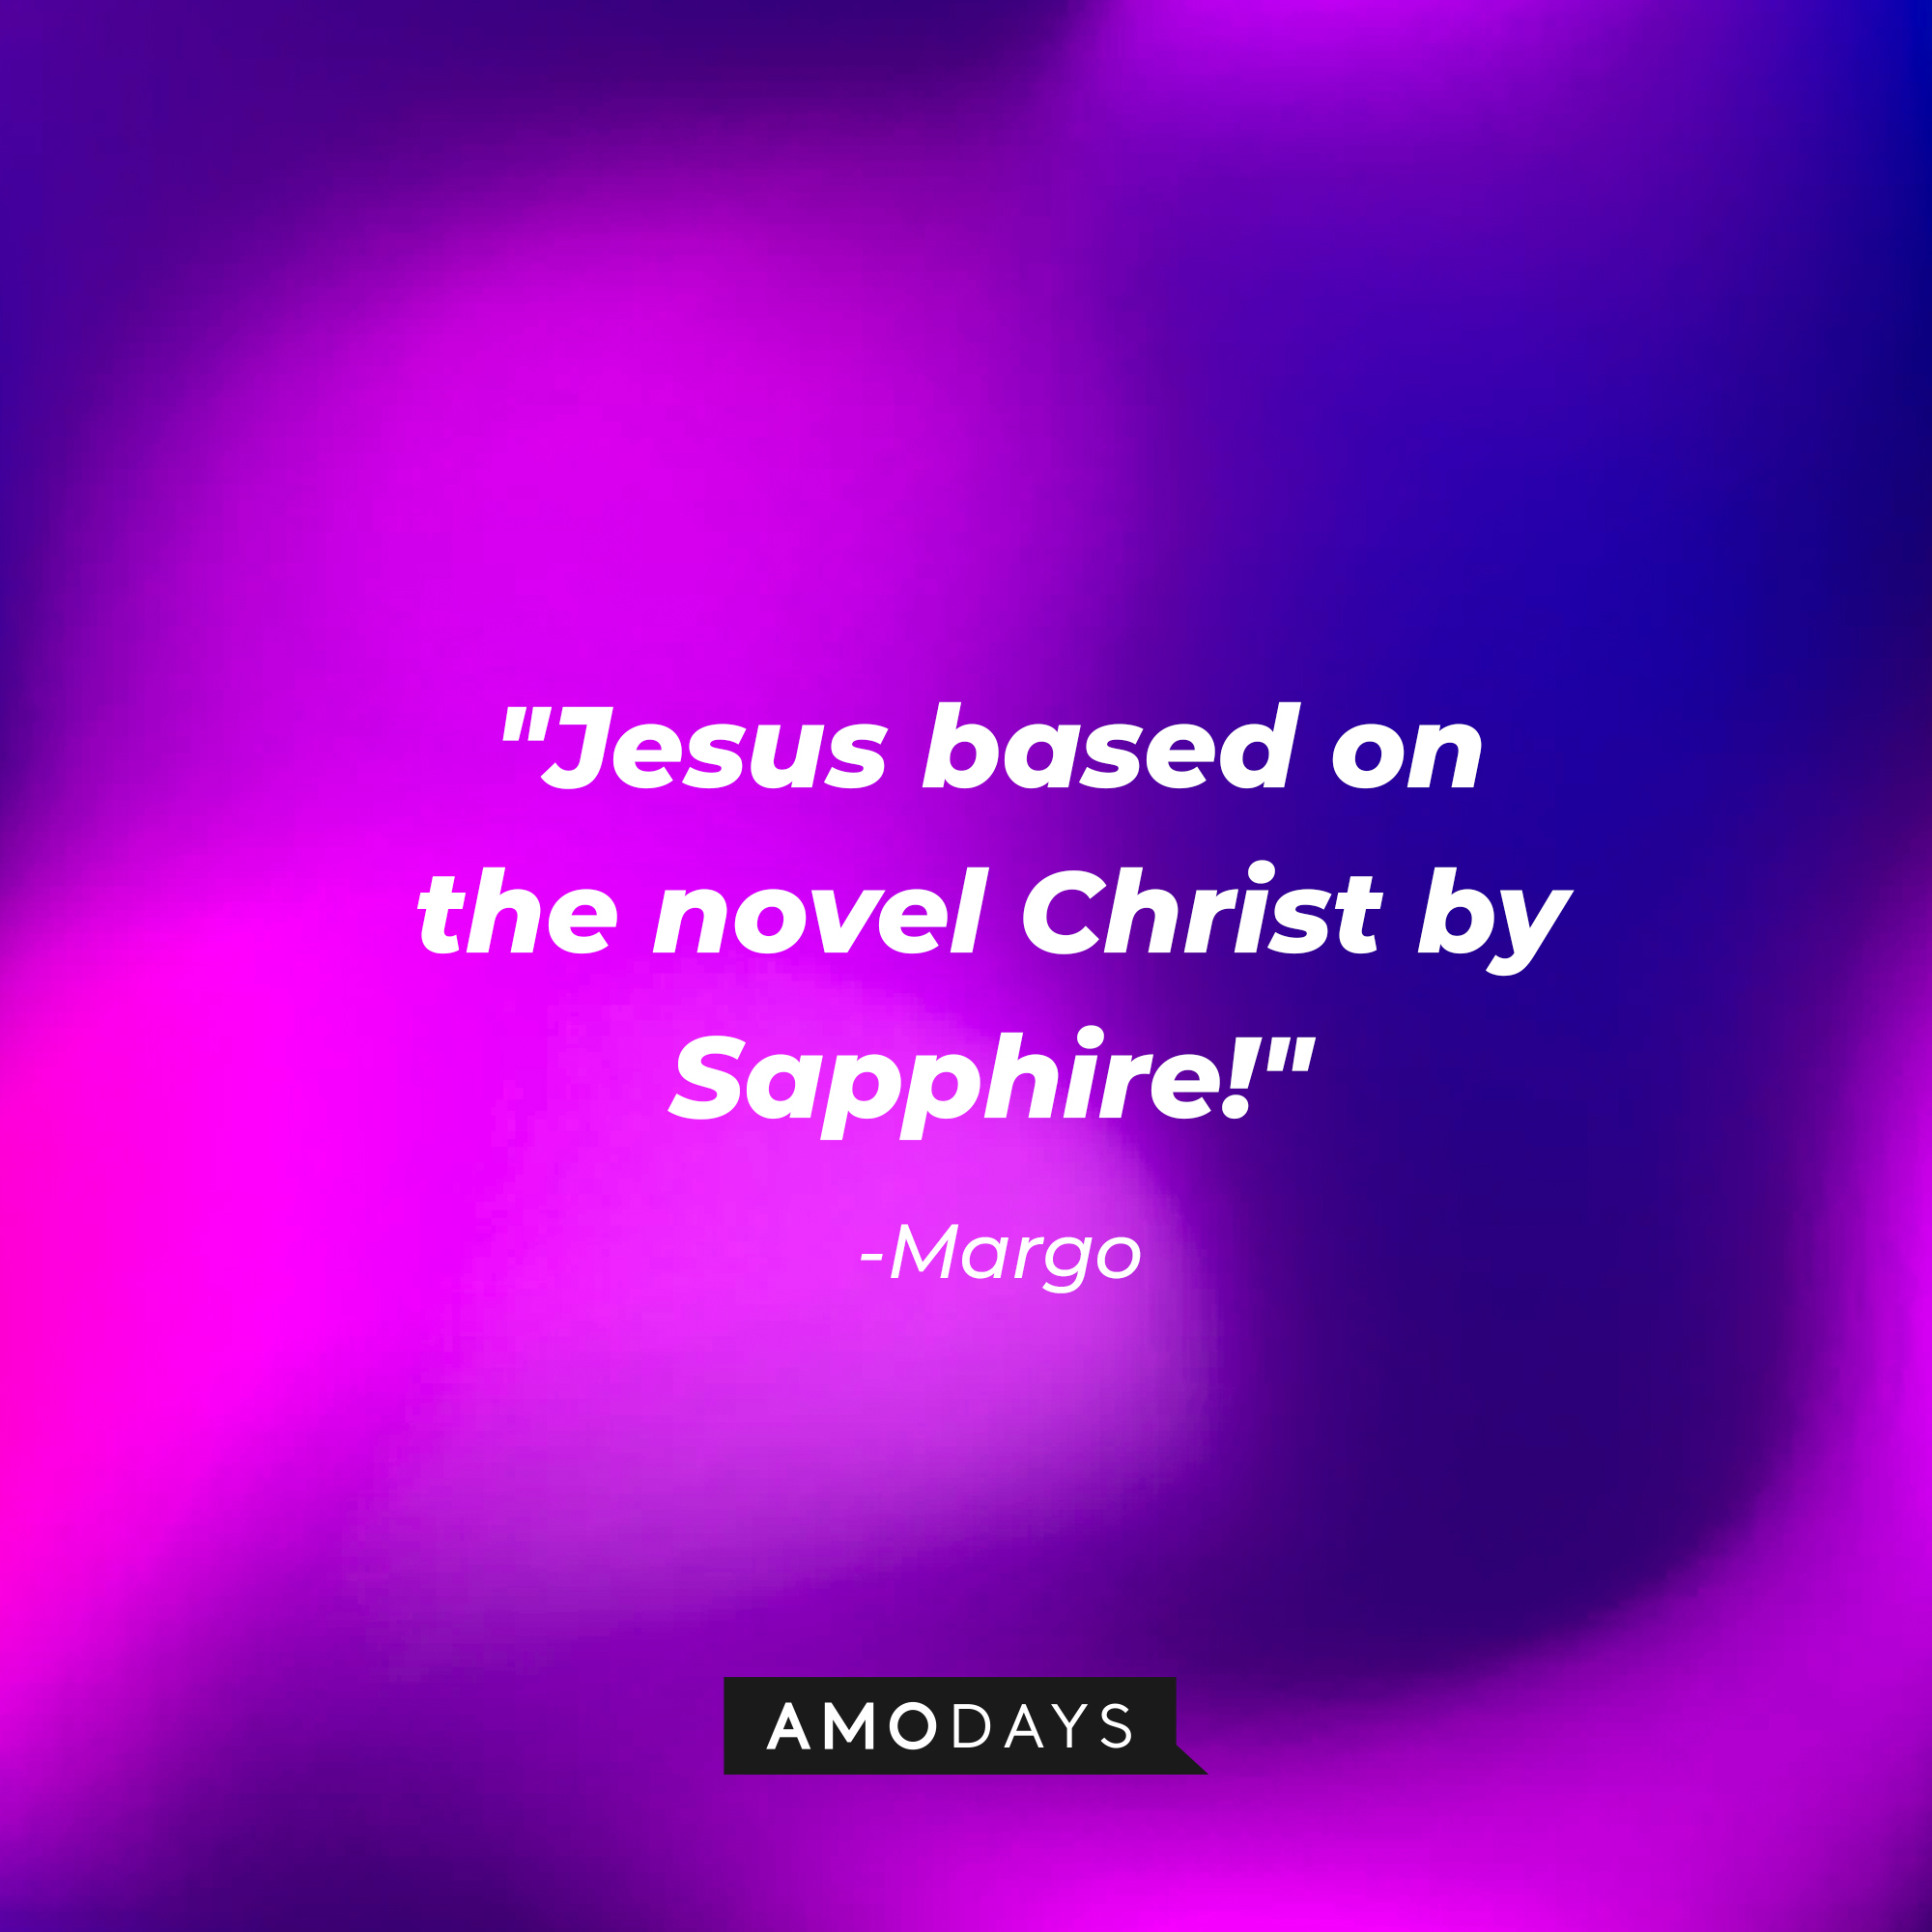 Margo’s quotes: "Jesus based on the novel Christ by Sapphire!" | Source: AmoDays